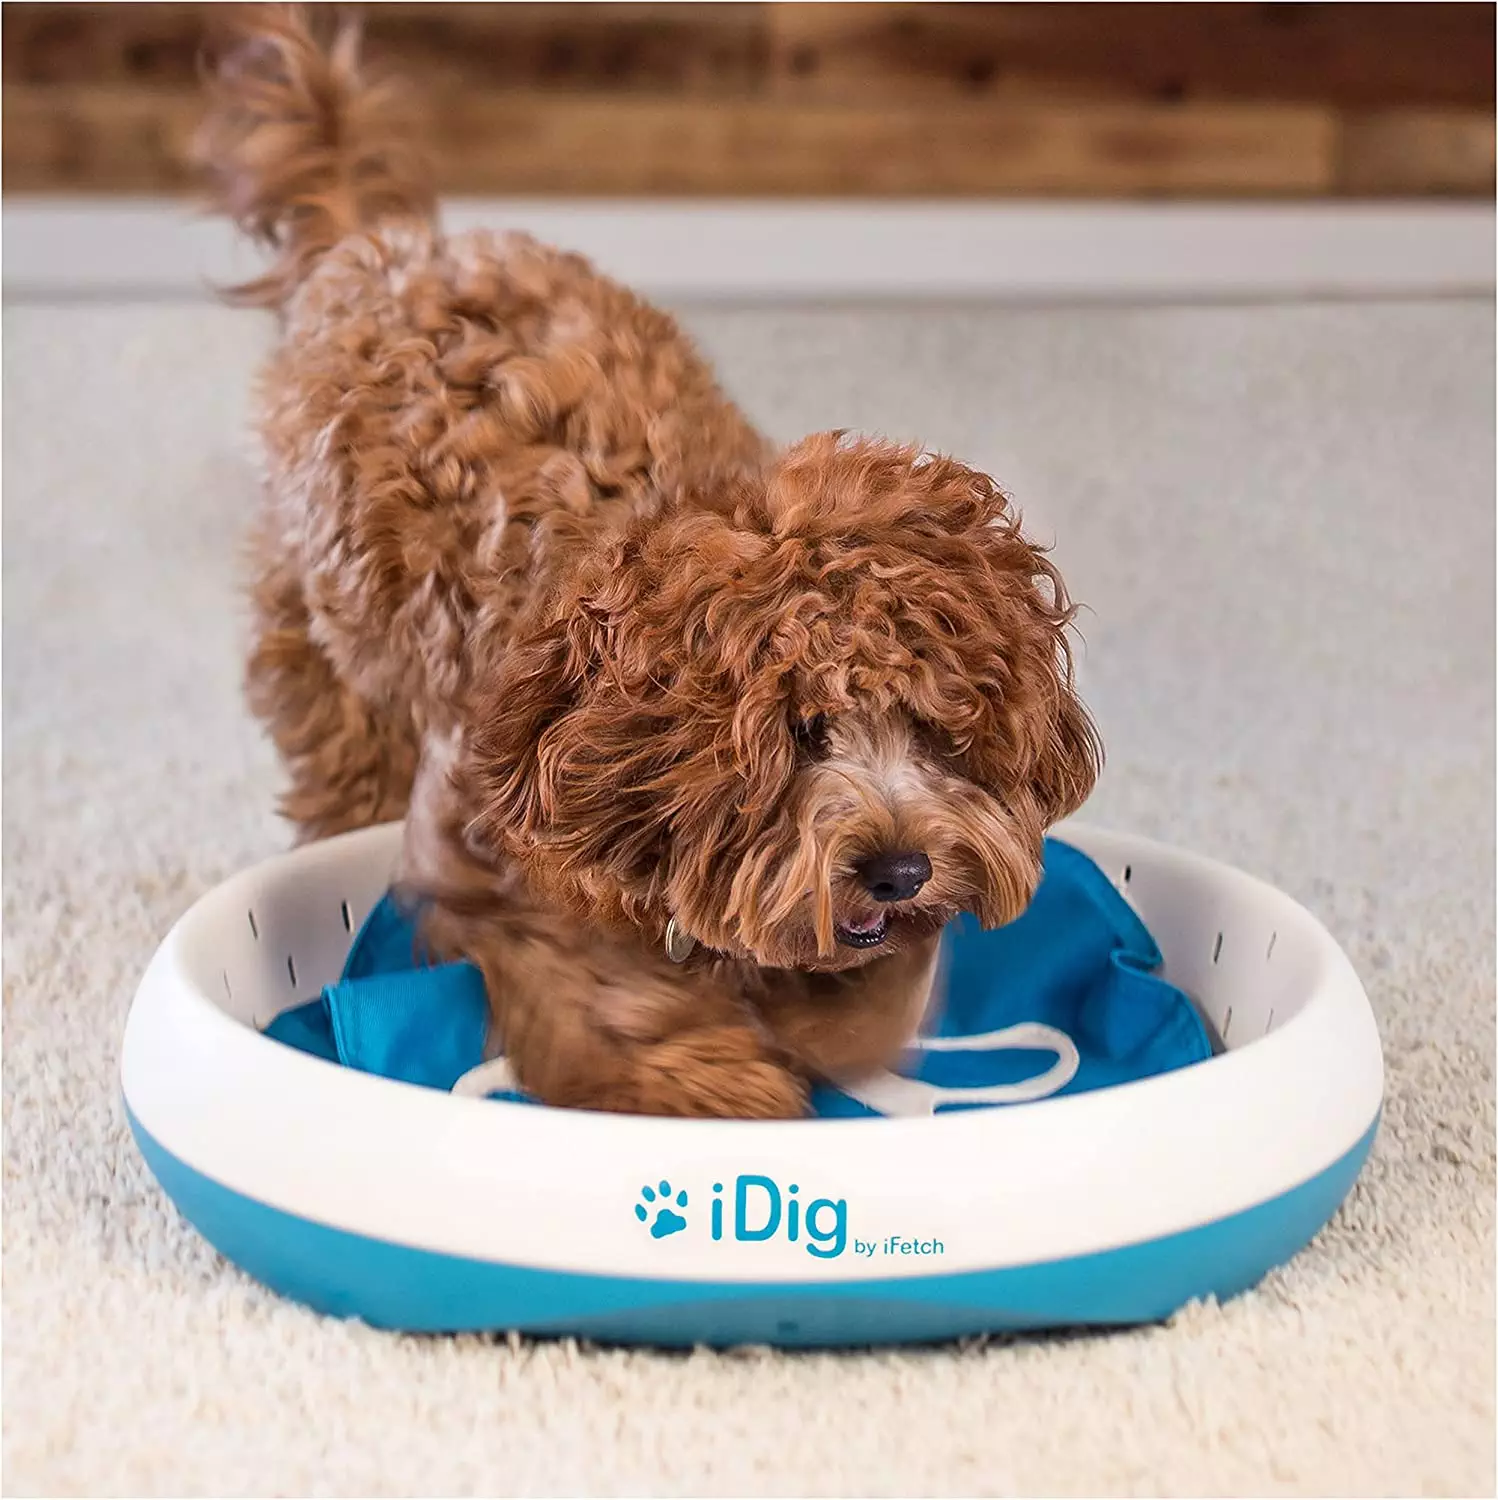 iDig Digging Toy by iFetch